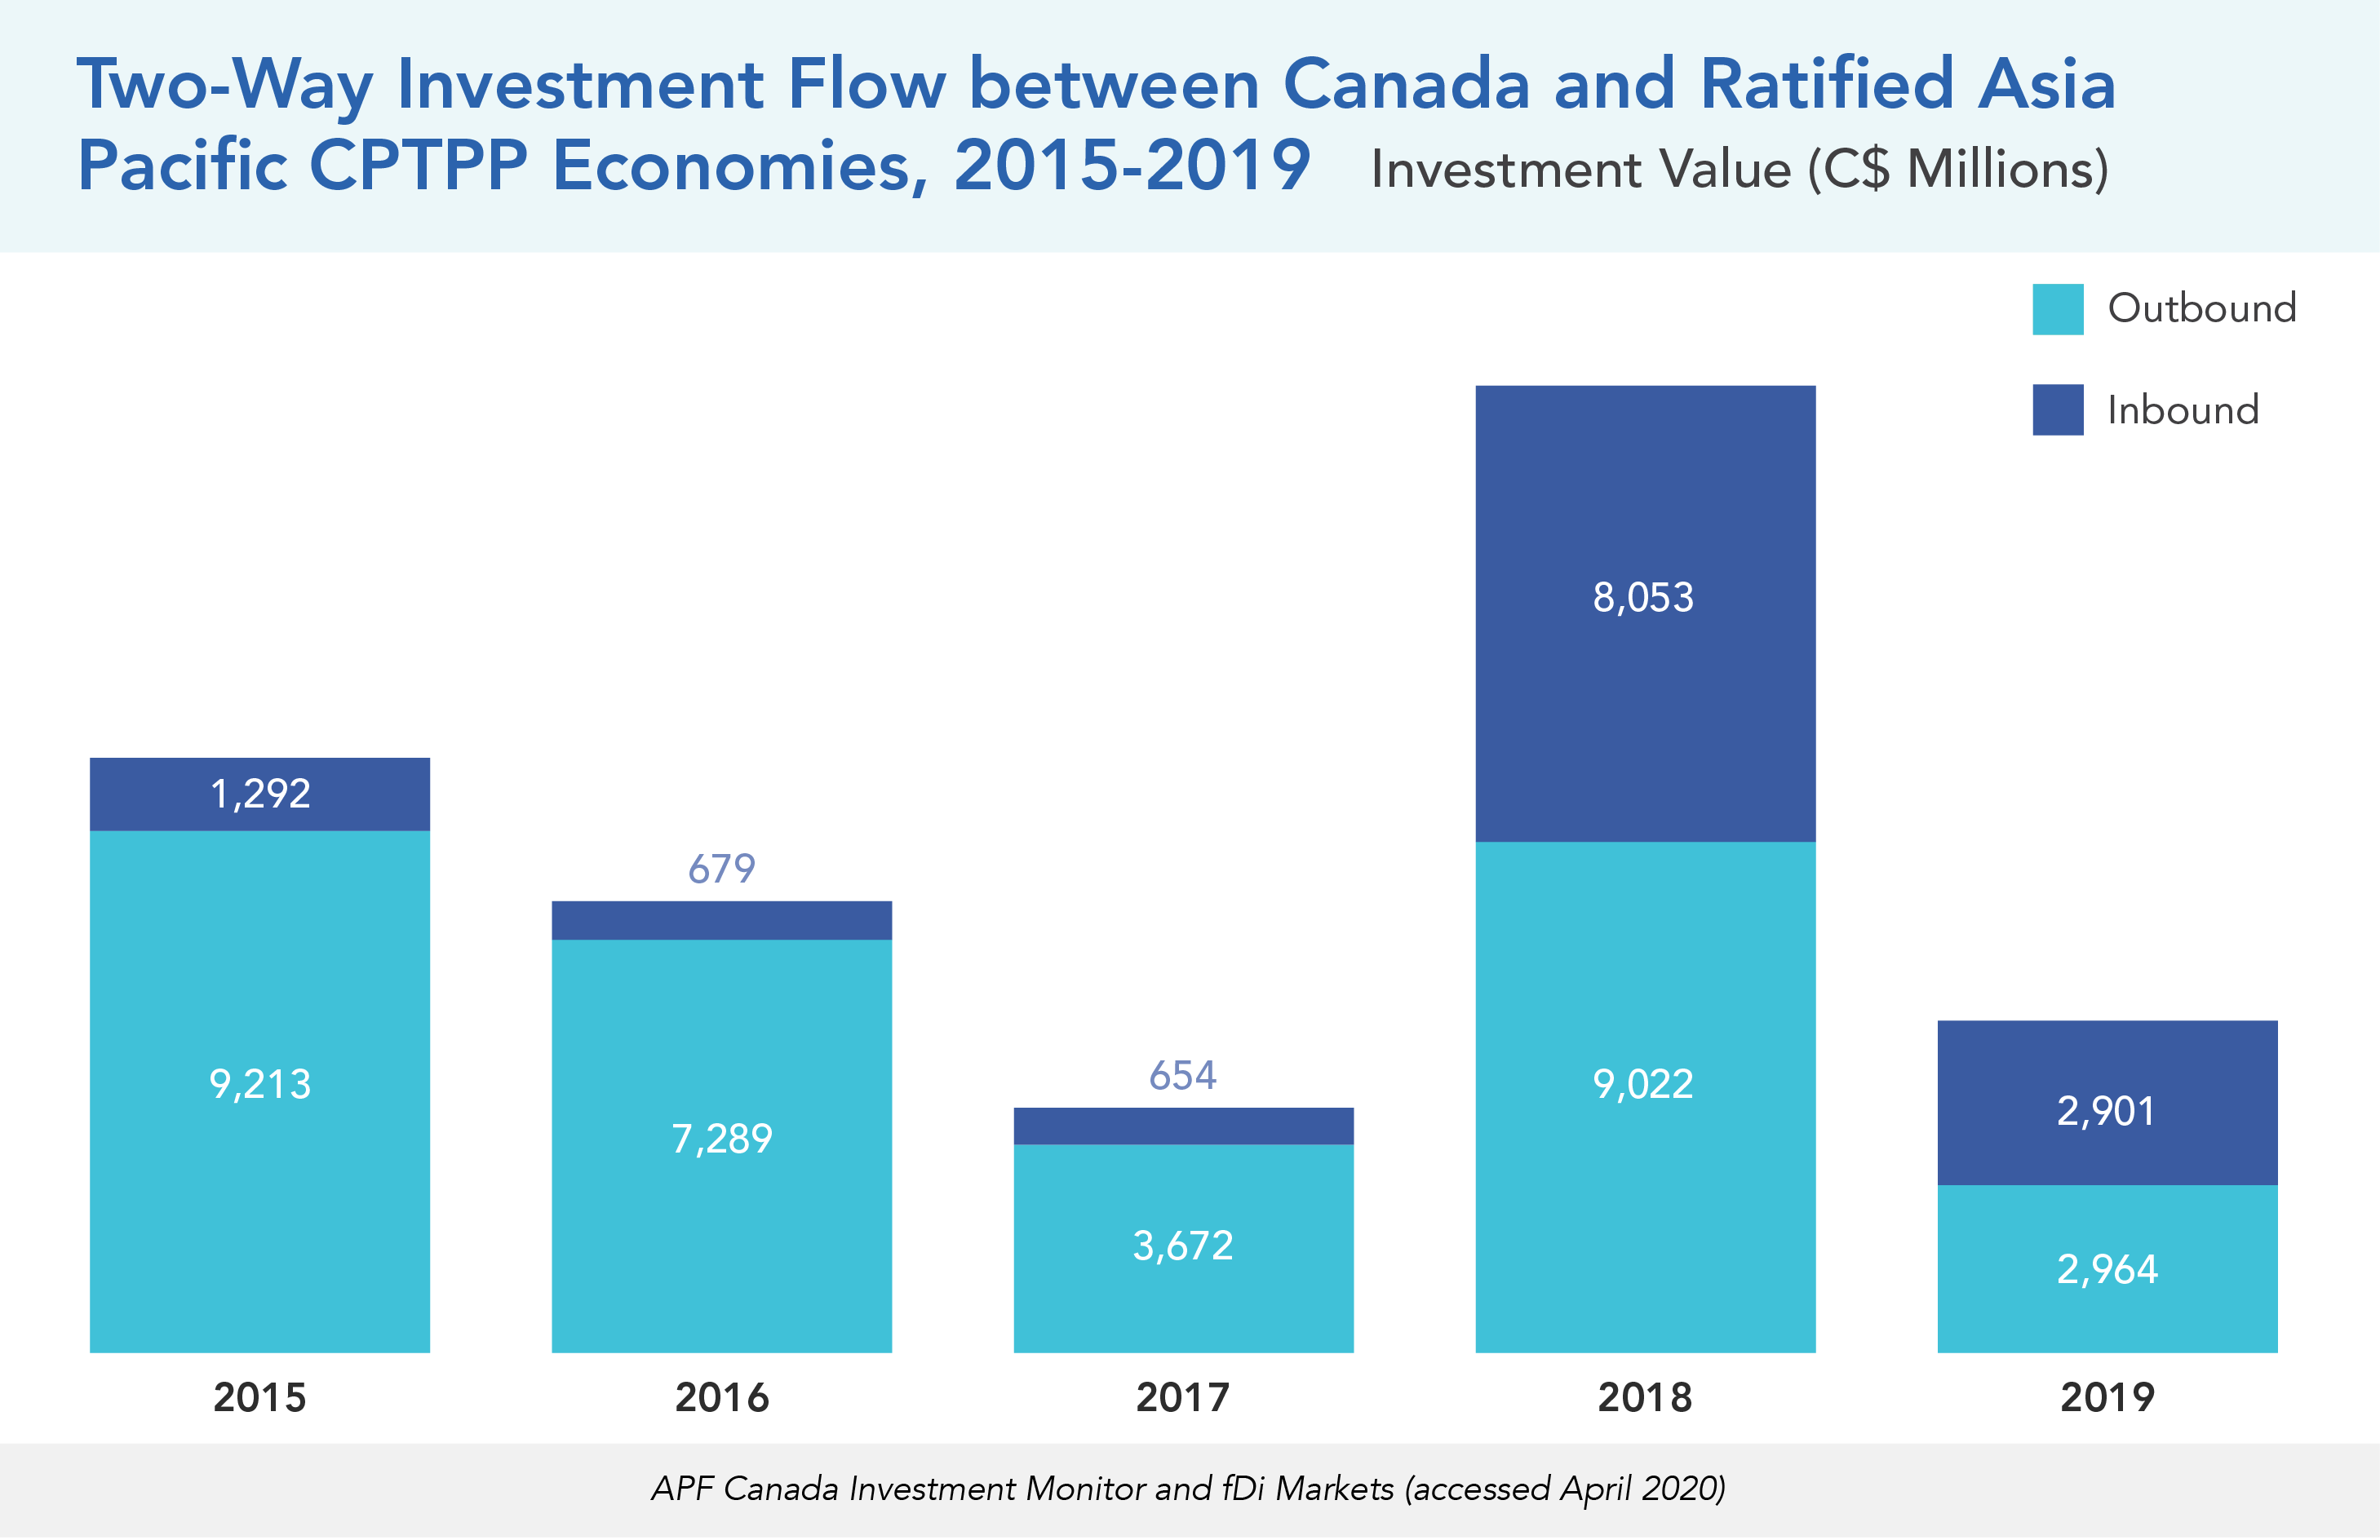 Two-Way Investment Flow between Canada and Ratified Asia Pacific CPTPP Economies, 2015-2019